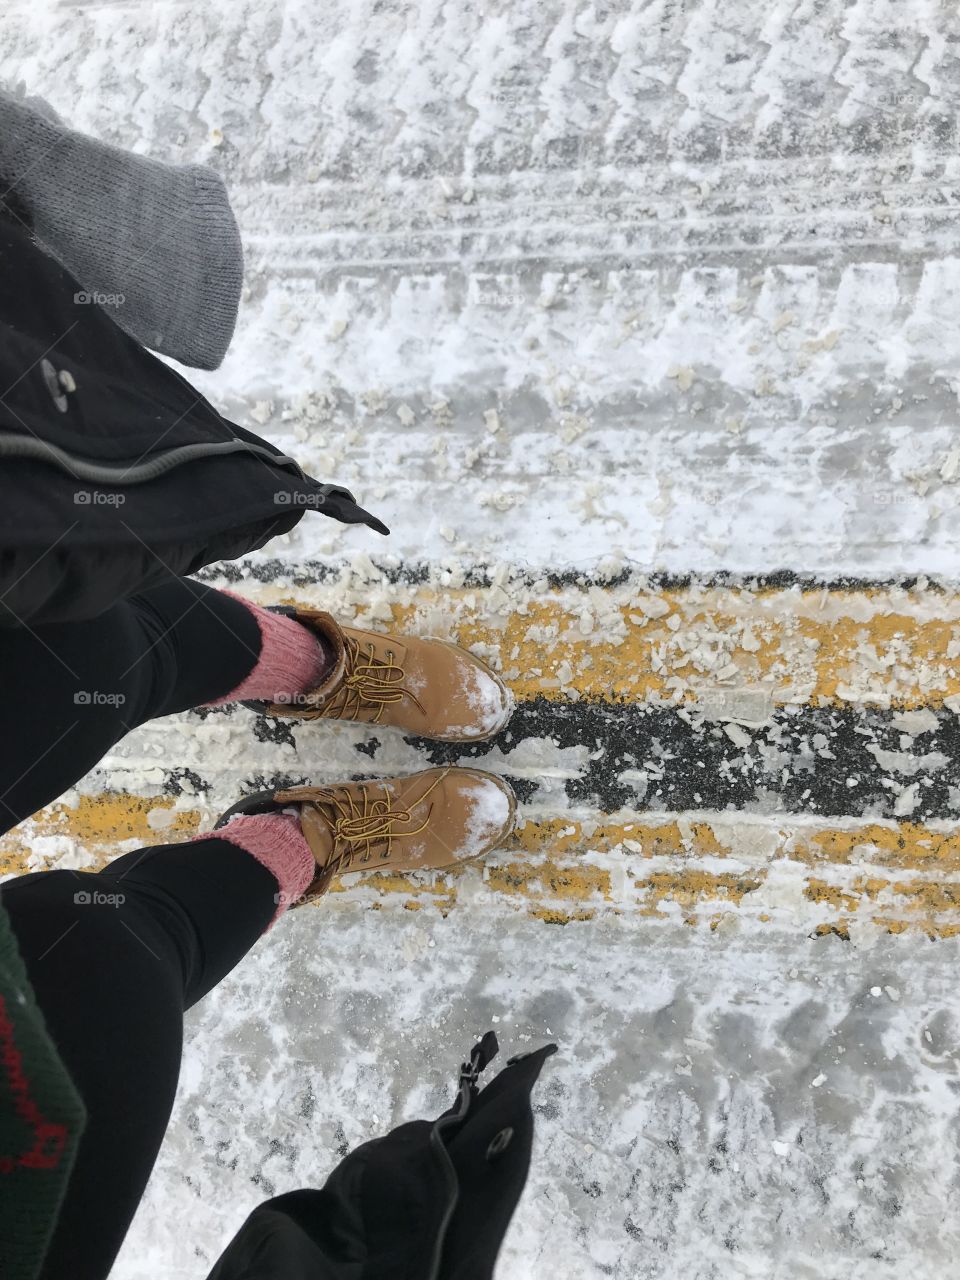 Standing in a snowy road